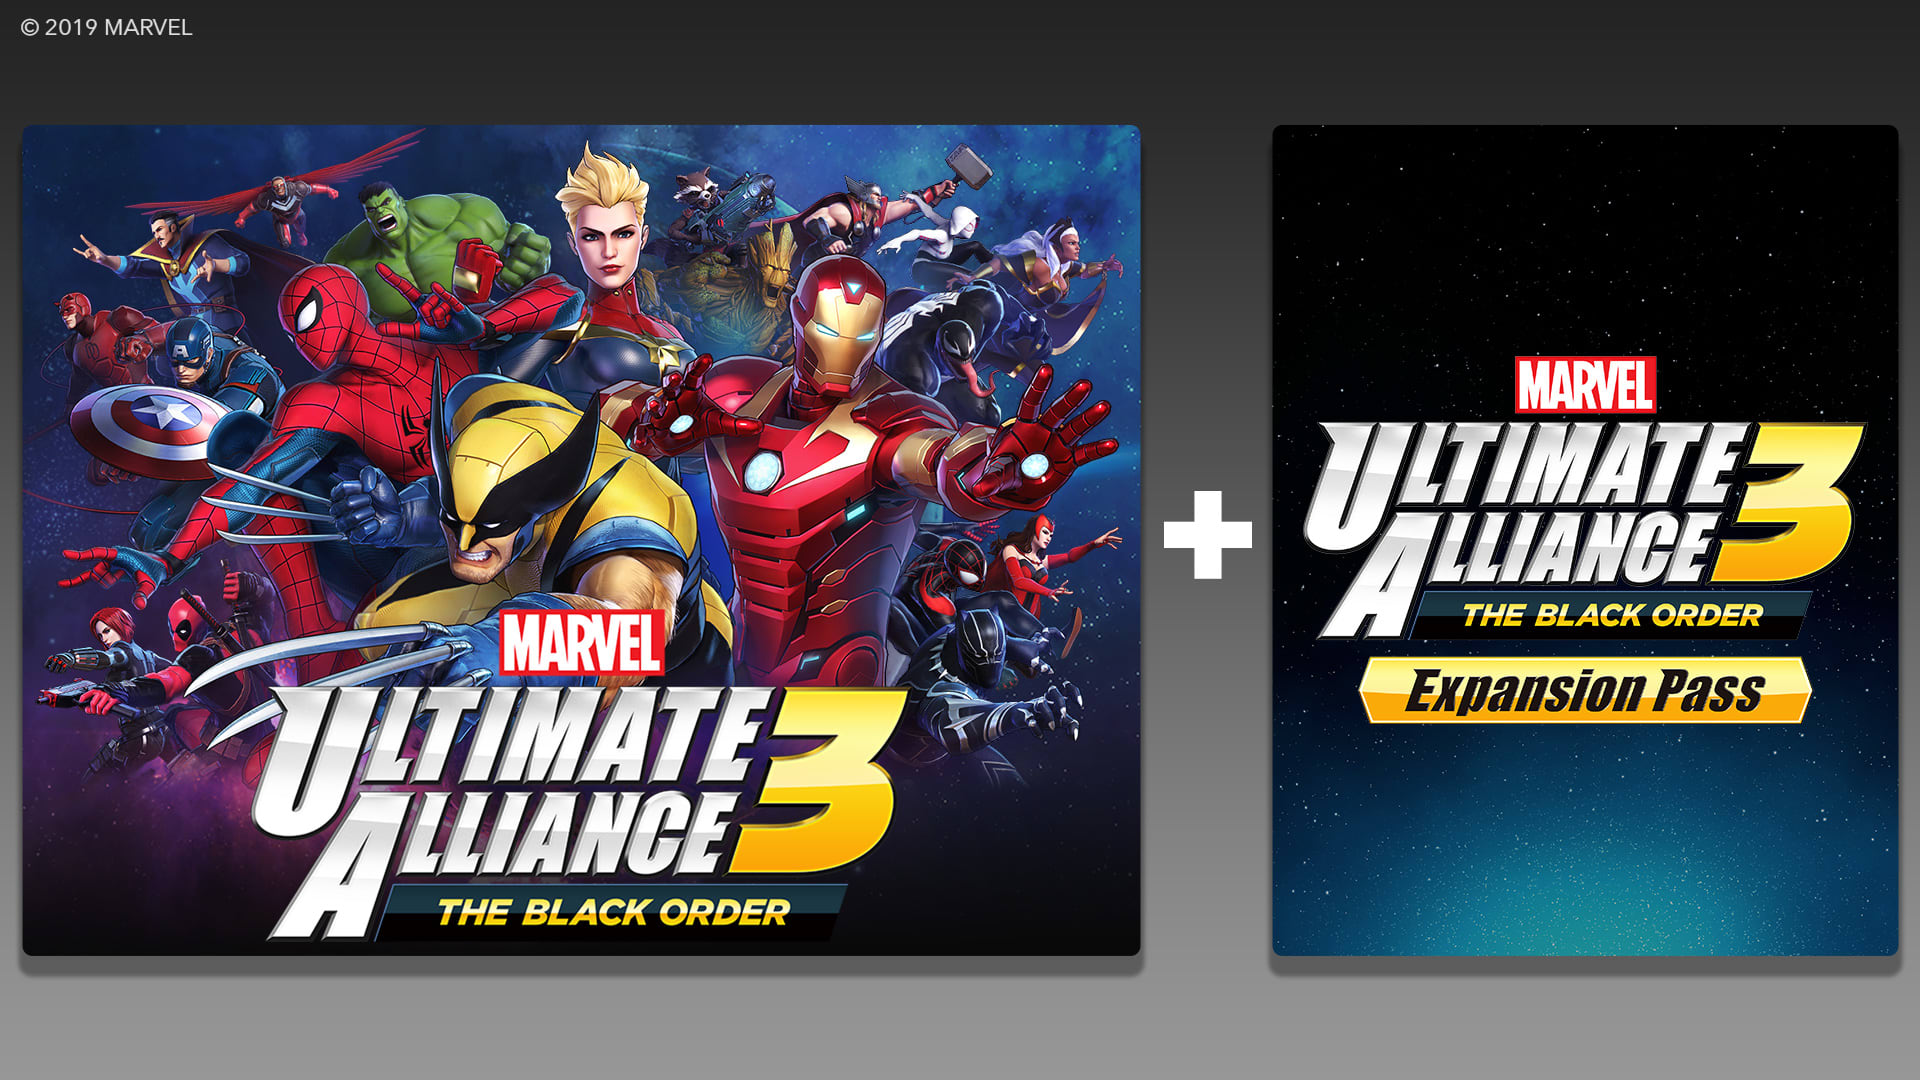 MARVEL ULTIMATE ALLIANCE 3: The Black Order and MARVEL ULTIMATE ALLIANCE 3: The Black Order Expansion Pass 